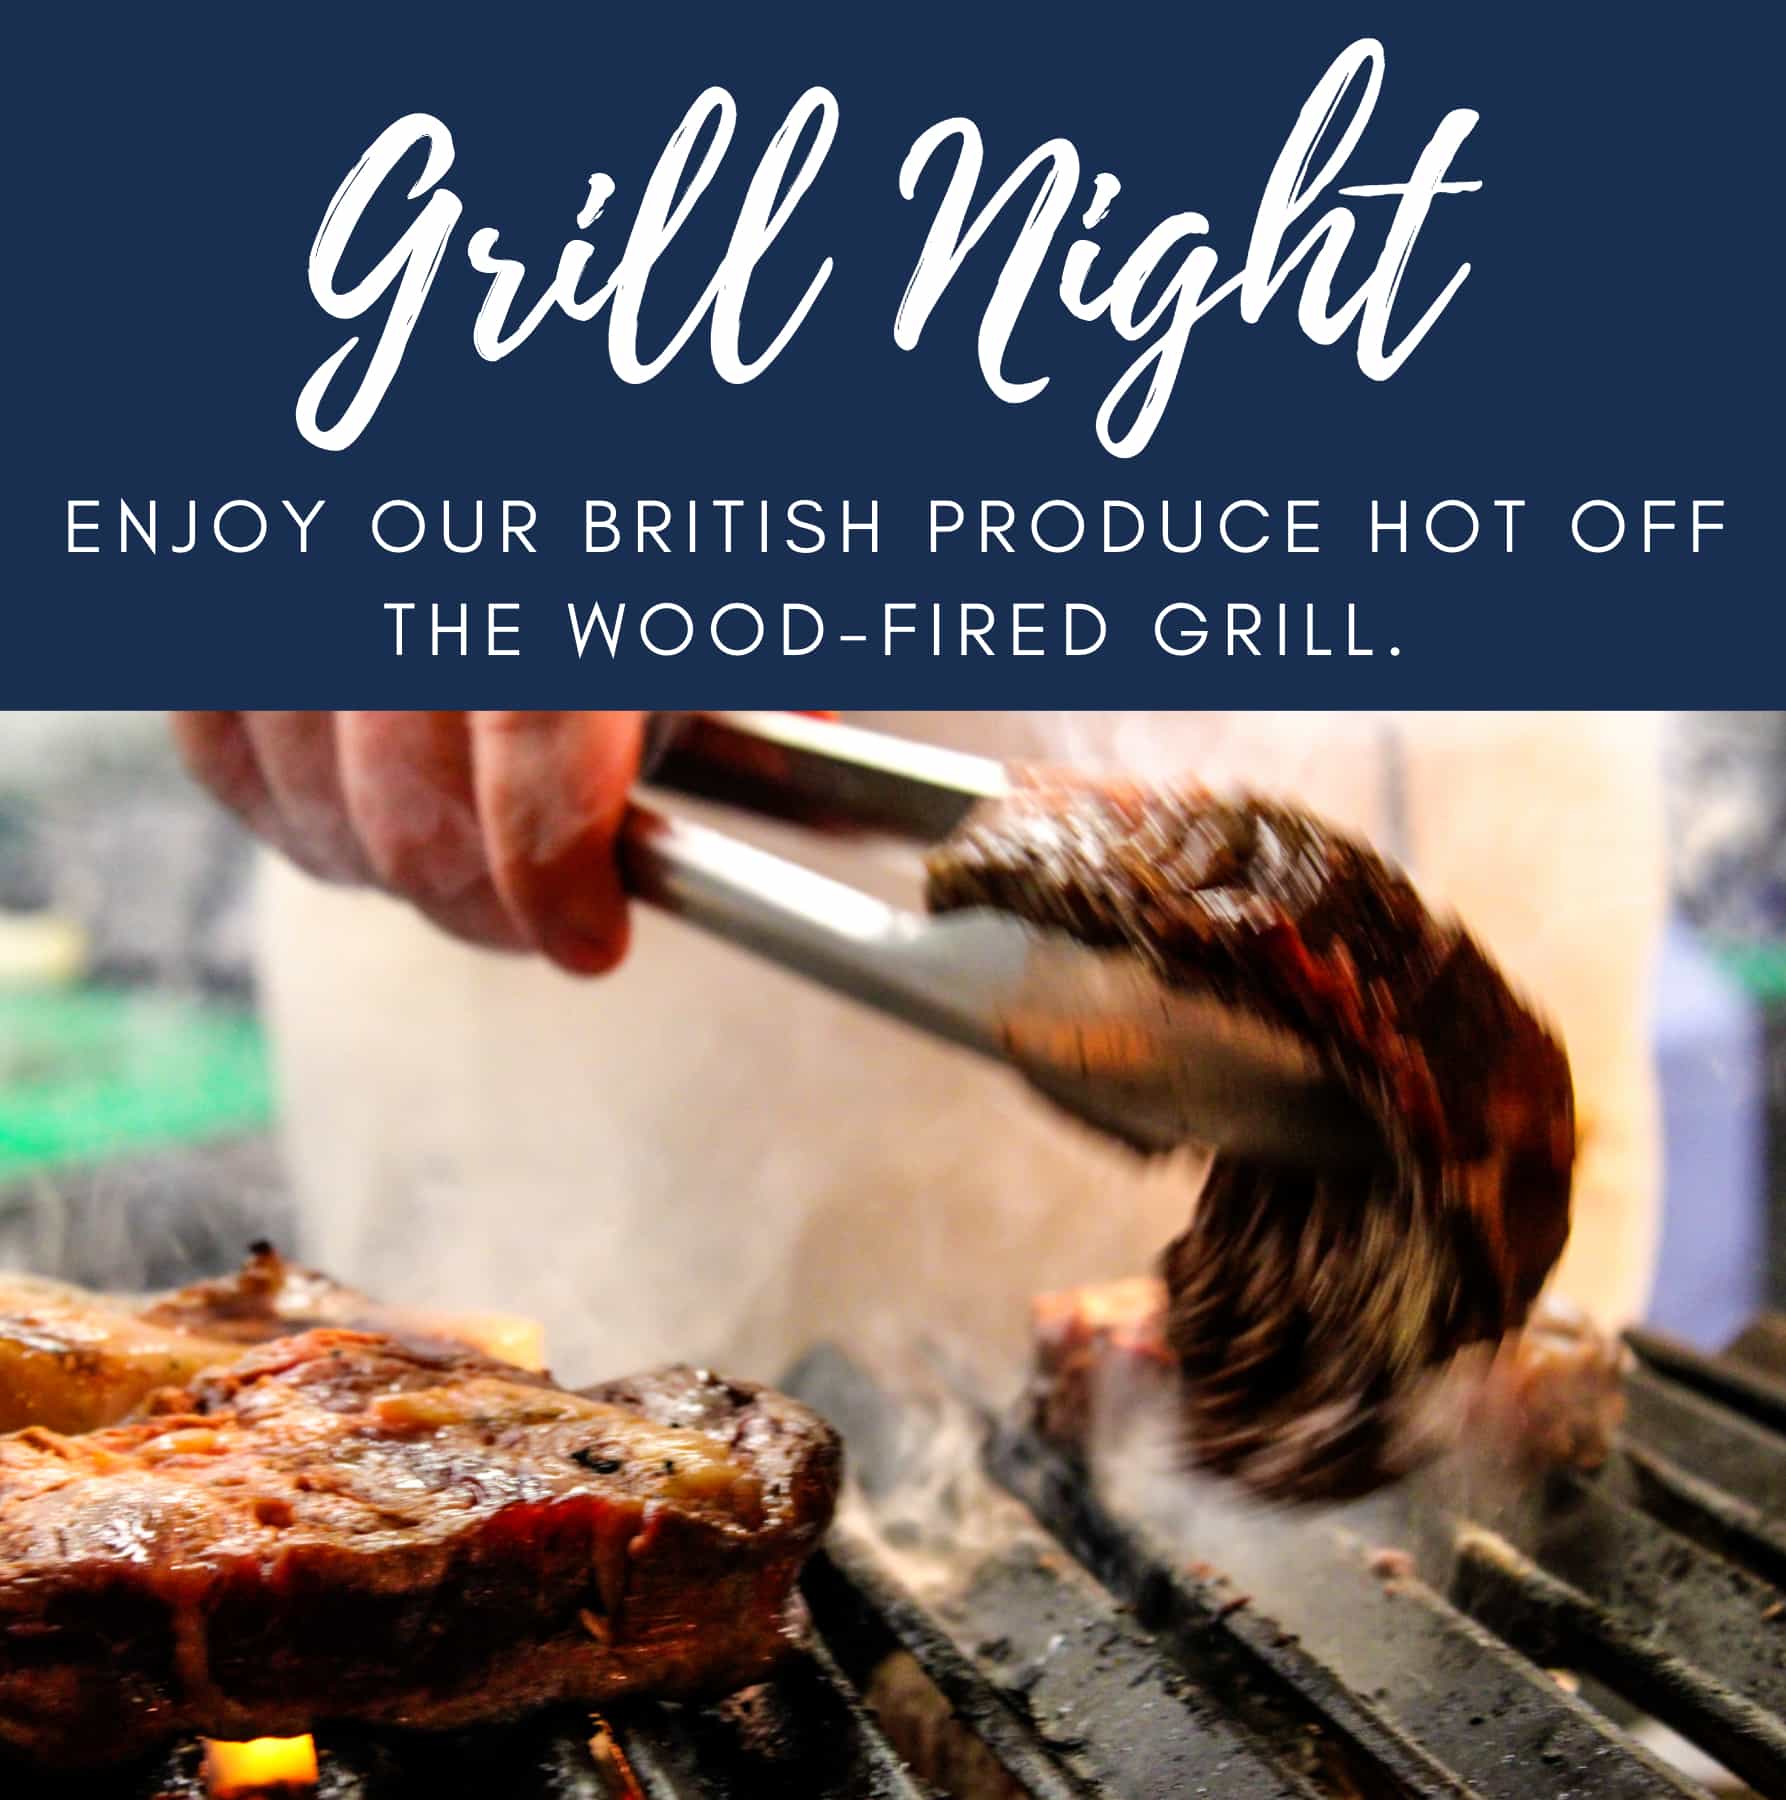 Wednesday Grill Night at Nutbourne